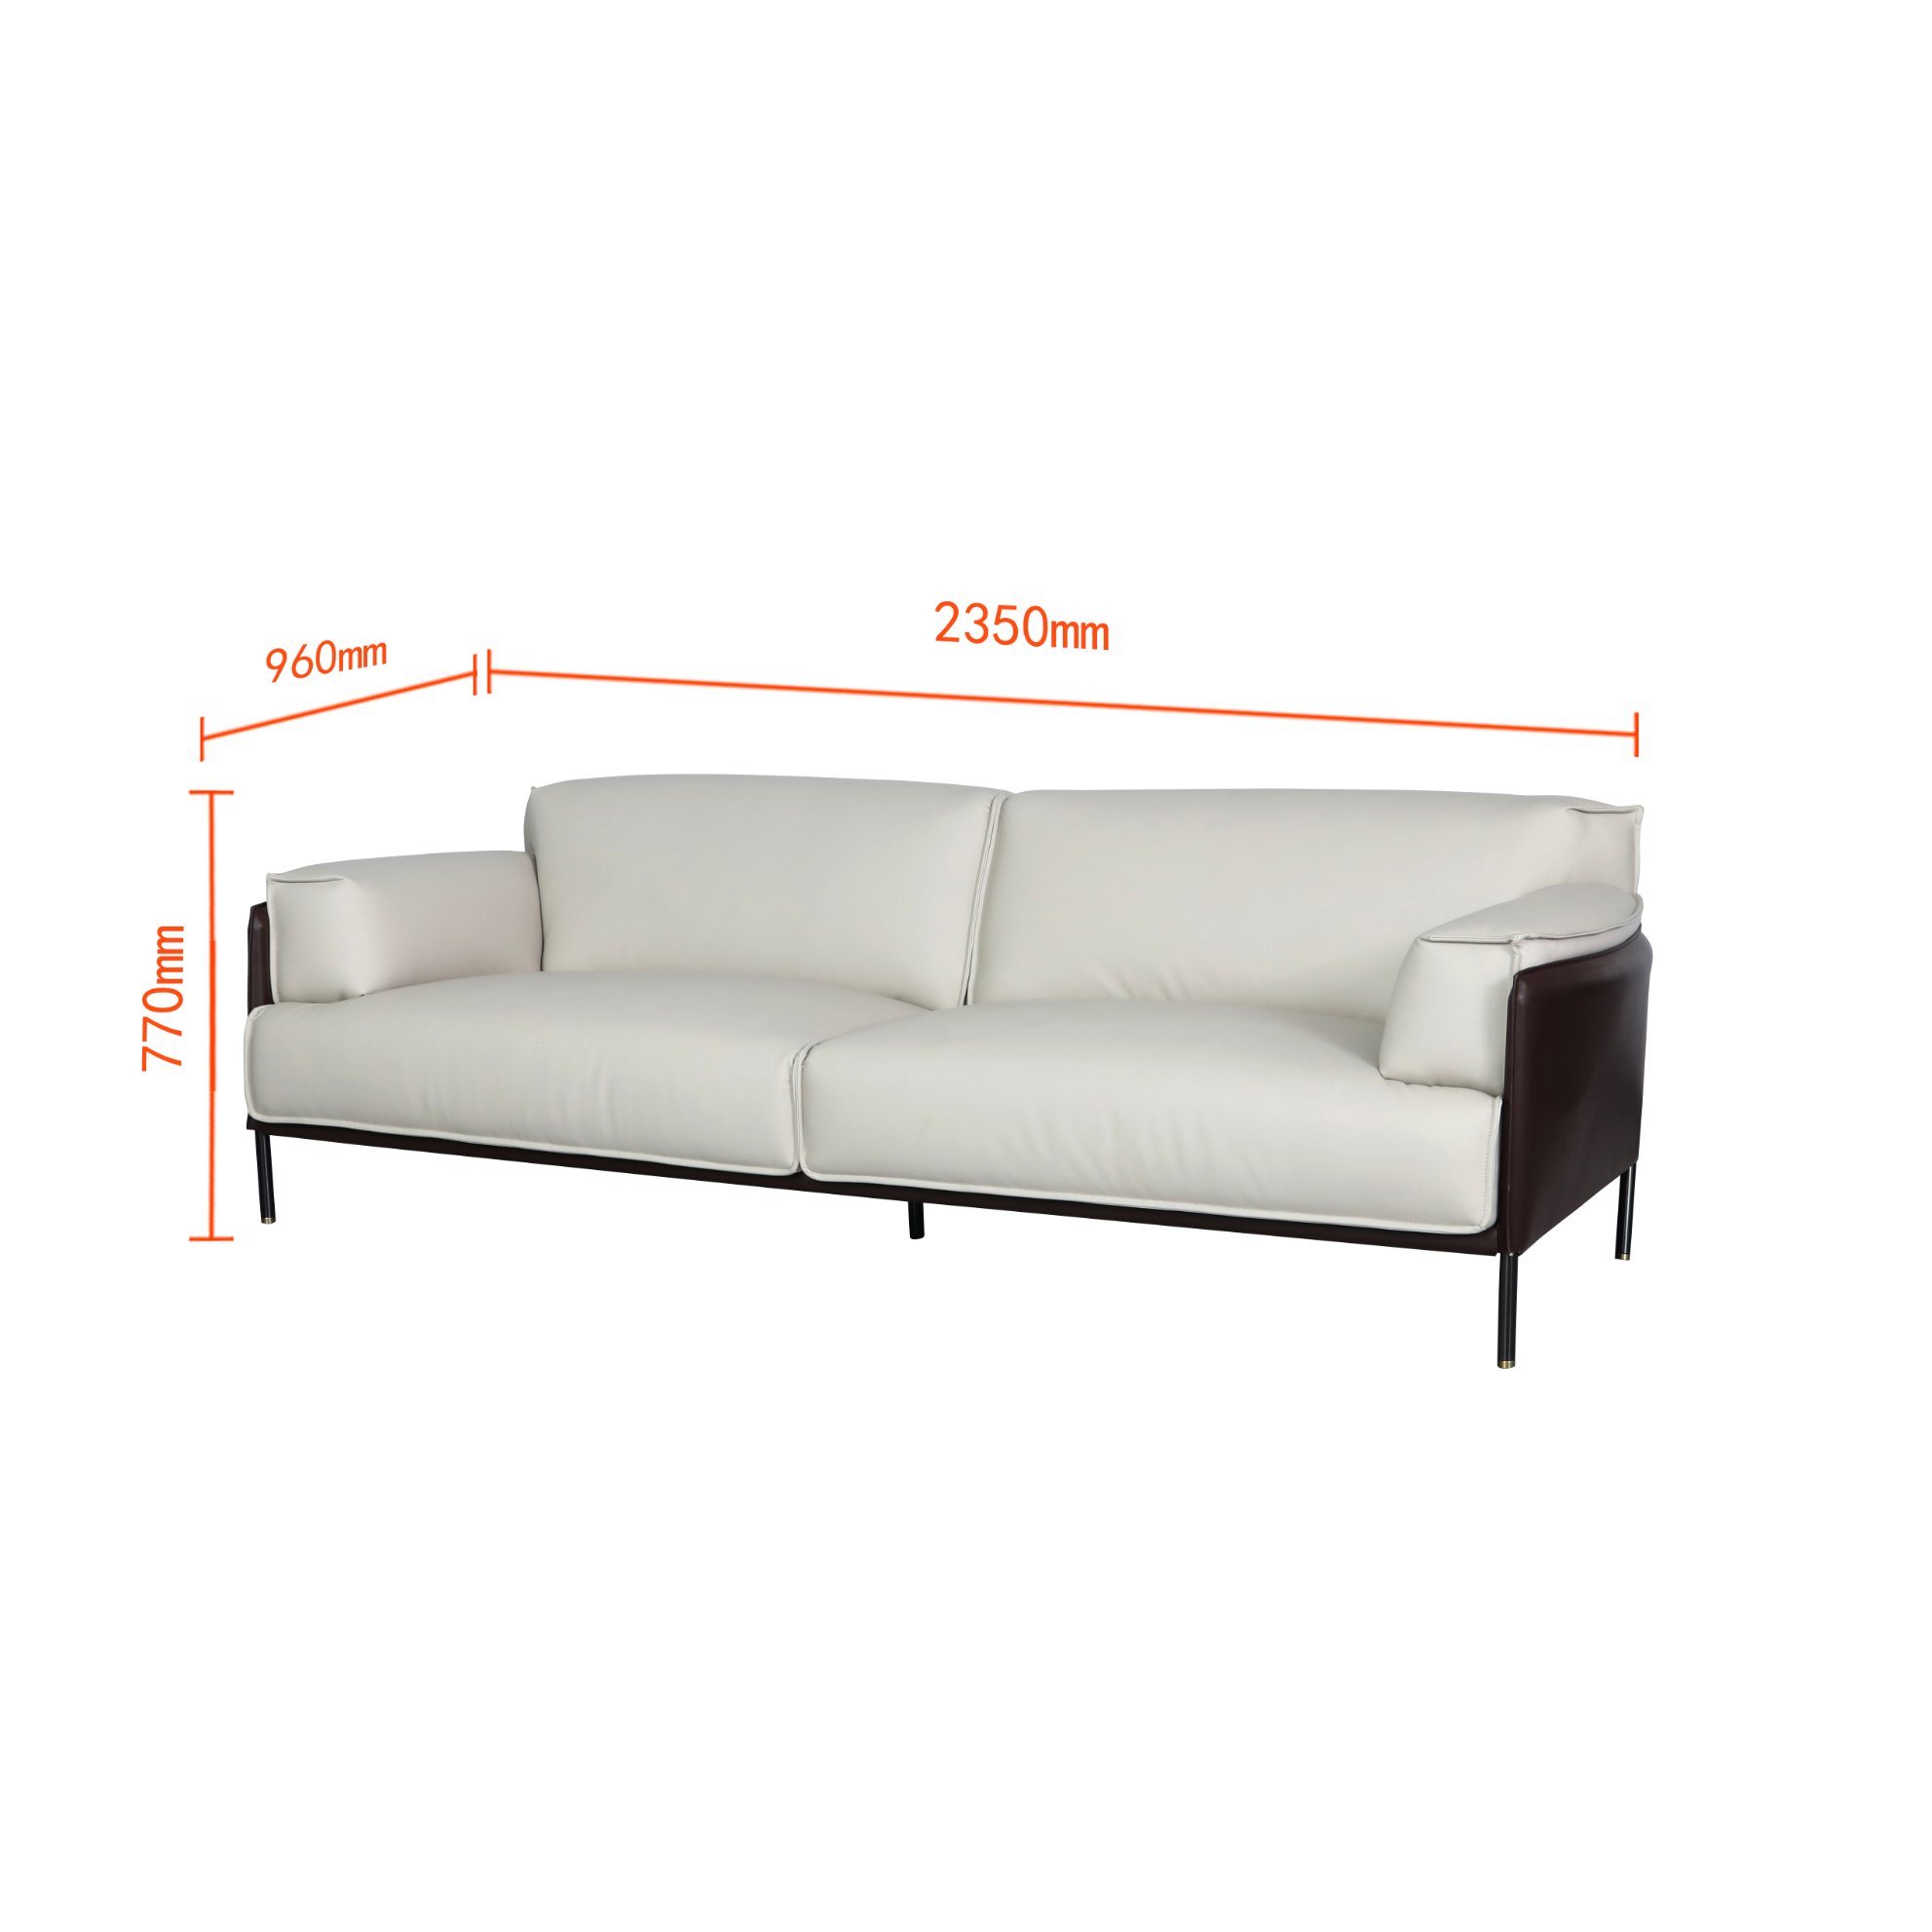 New Living Room Leather Sofa Home Furniture